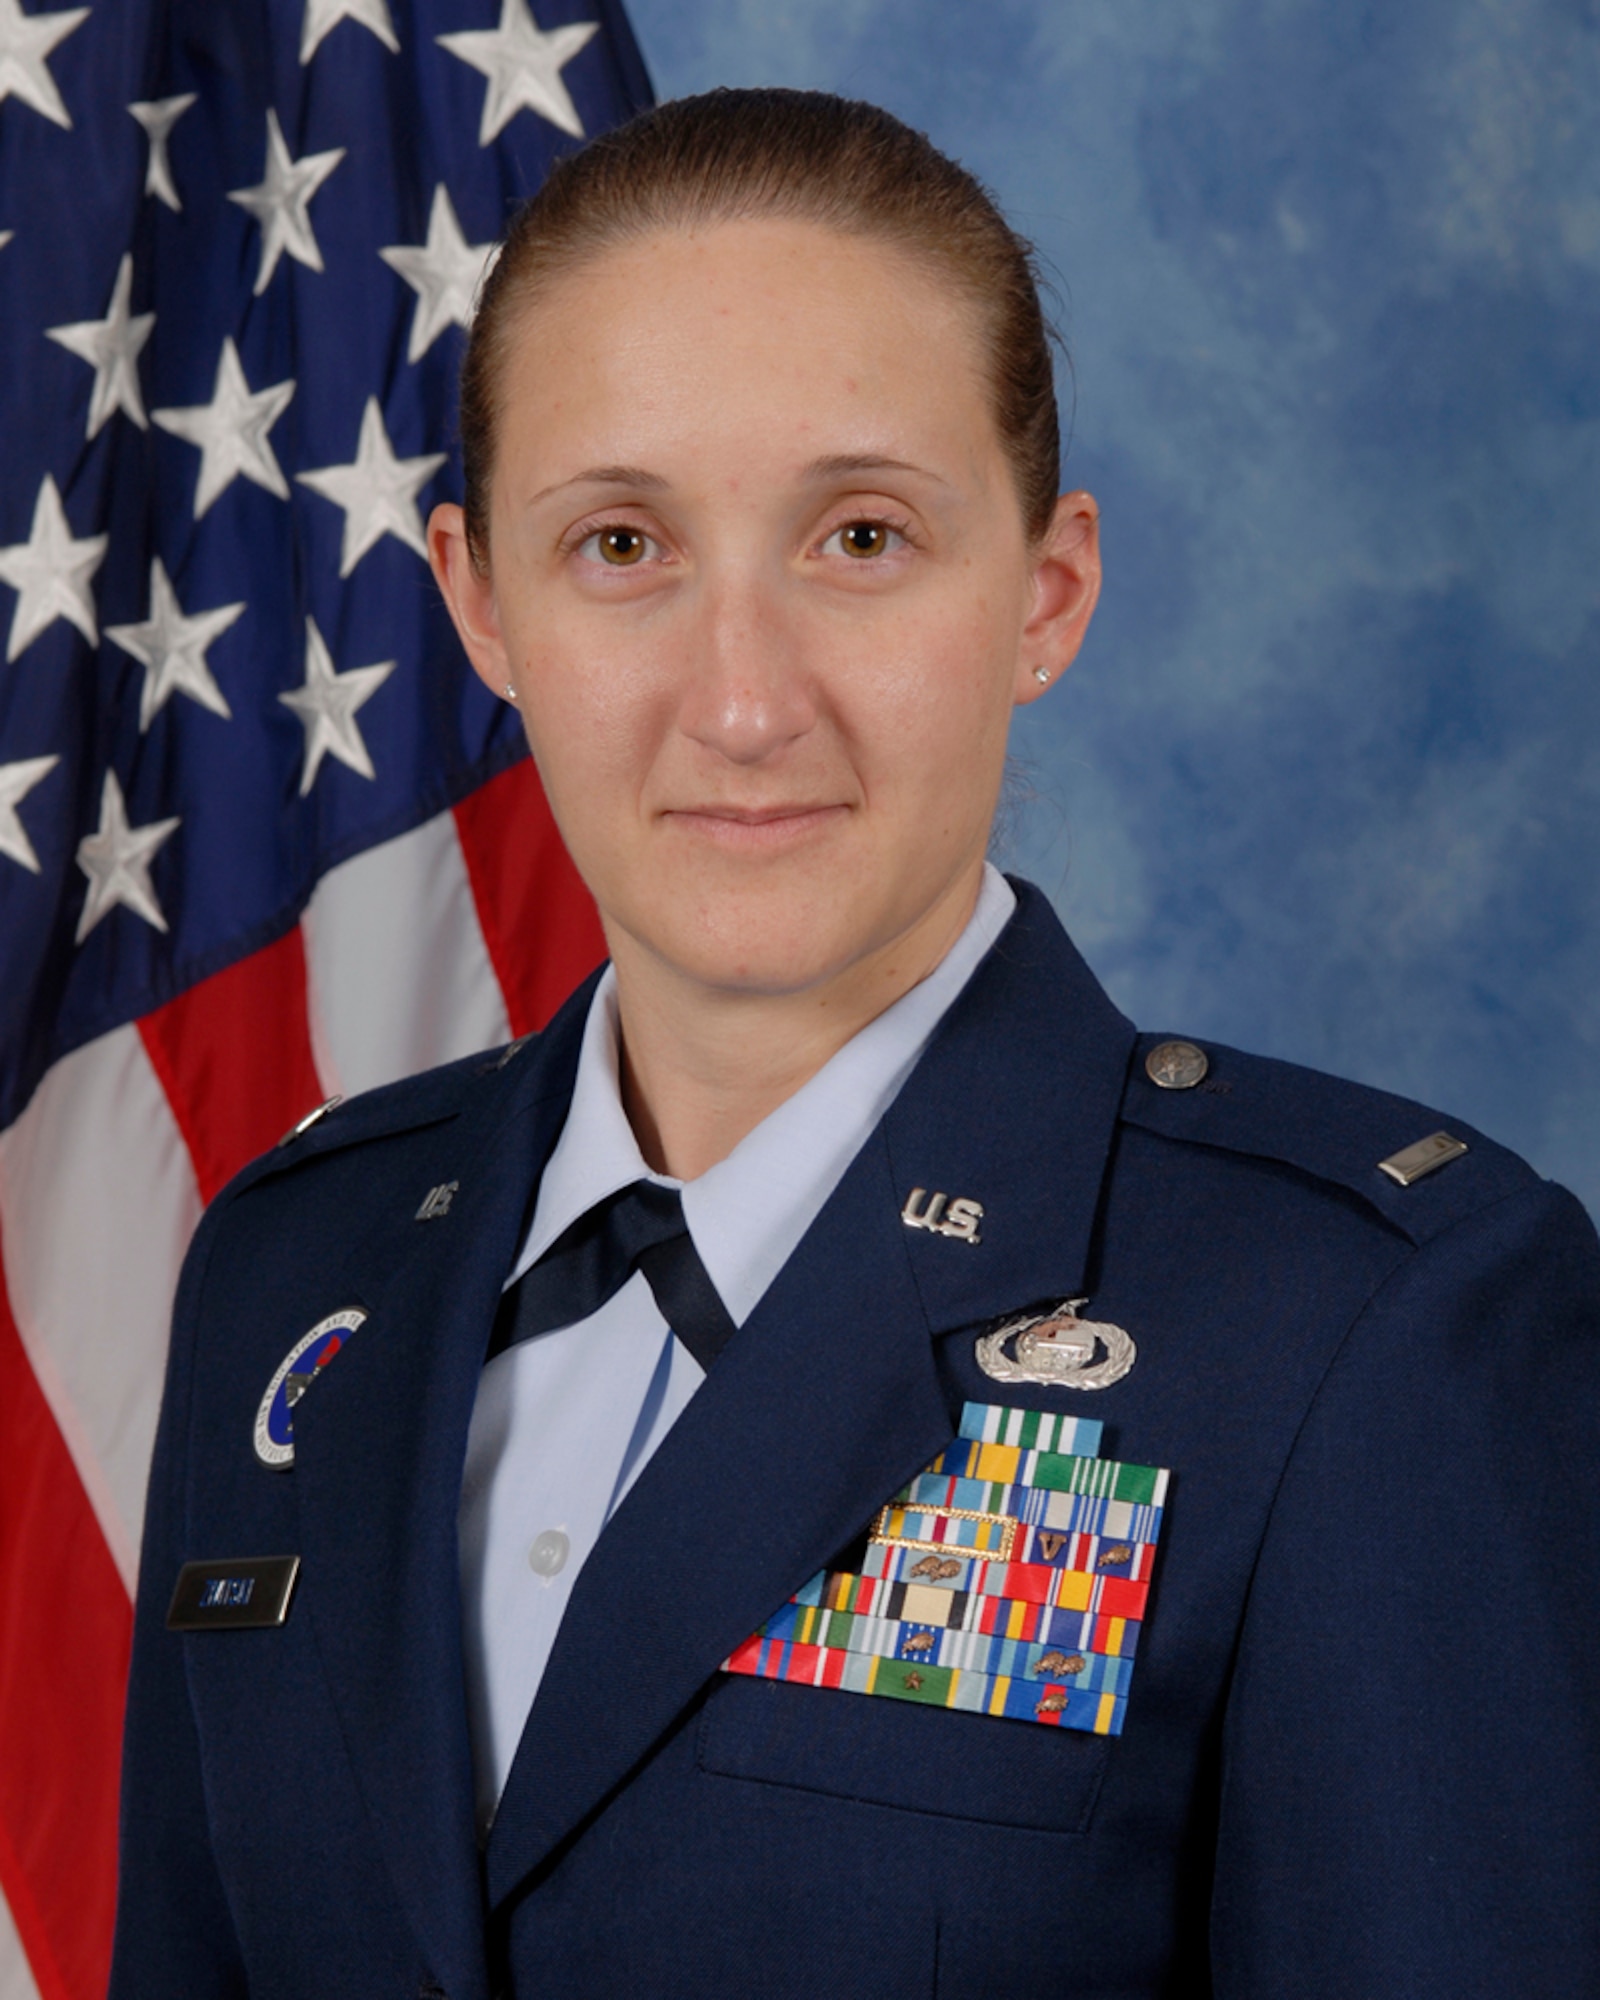 1st Lt. Liane Zivitski, 315th Training Squadron is the 2009 Company Grade Officer of the year at 17th Training Wing, Goodfellow AFB, Texas. The annual awards program recognizes both civilians and members in 16 categories of the Air Force, Army, Navy and Marines who are assigned to the wing, for their significant contributions to the 17 TRW, the community and mission. (U.S. Air Force photo/ Lou Czarnecki)